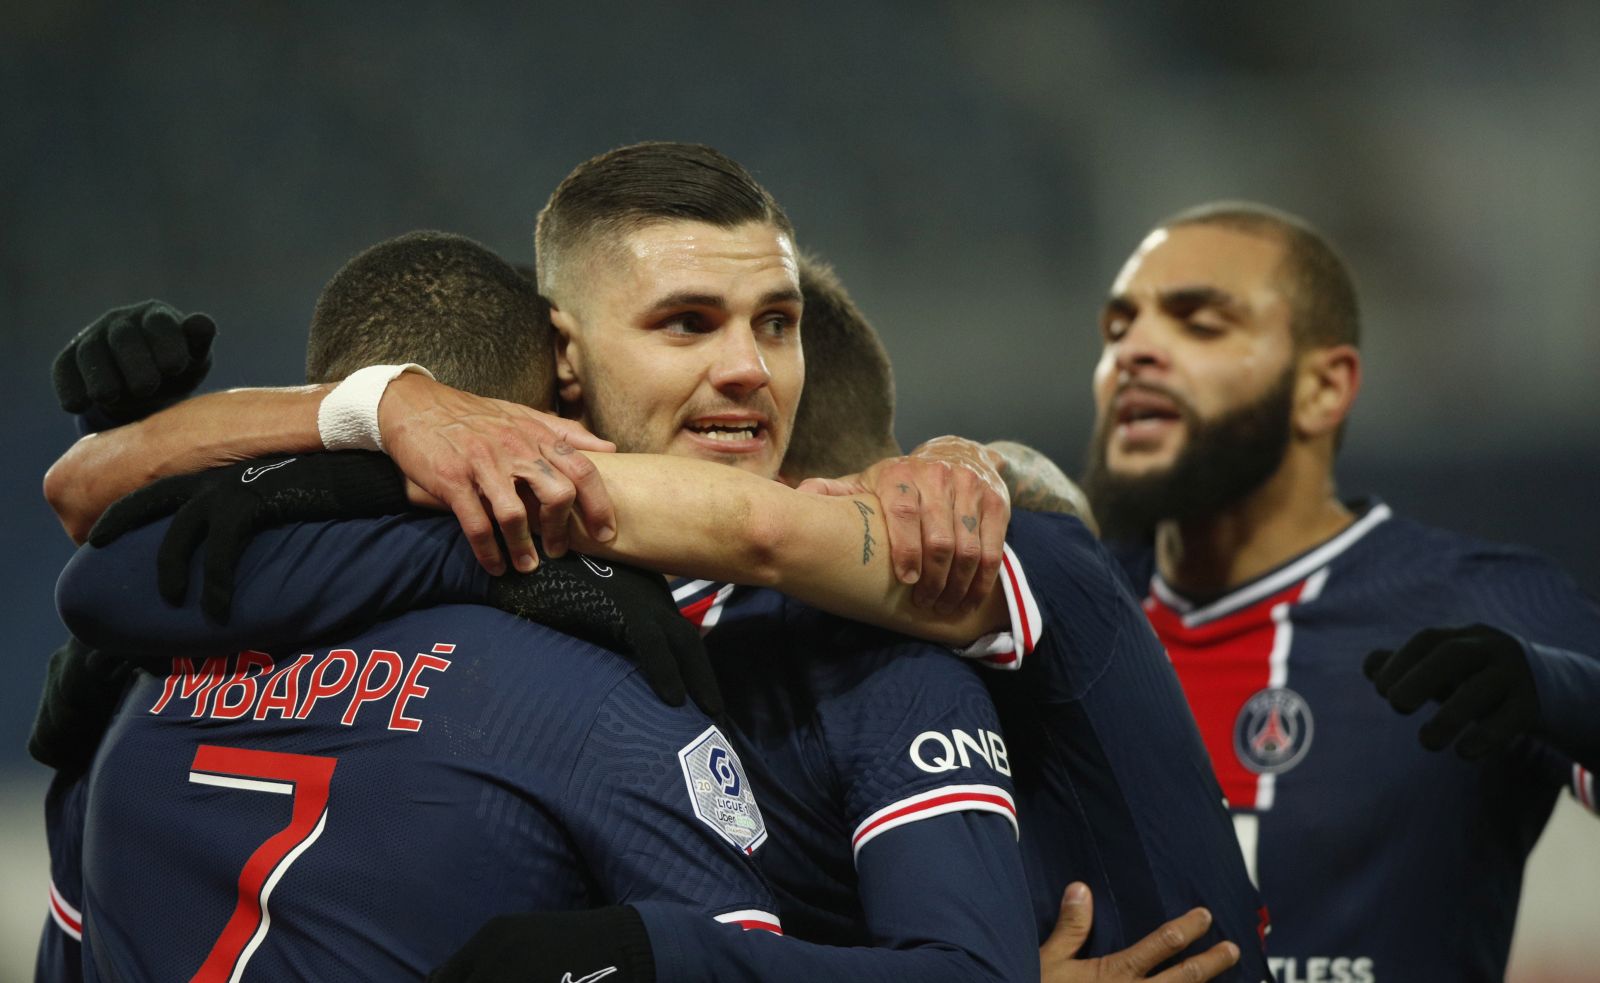 epa08929364 Paris Saint Germain's Mauro Icardi celebrates after scoring during the French Ligue 1 soccer match between PSG and Brest at the Parc des Princes stadium in Pa?ris, France, 09 January 2021.  EPA/YOAN VALAT